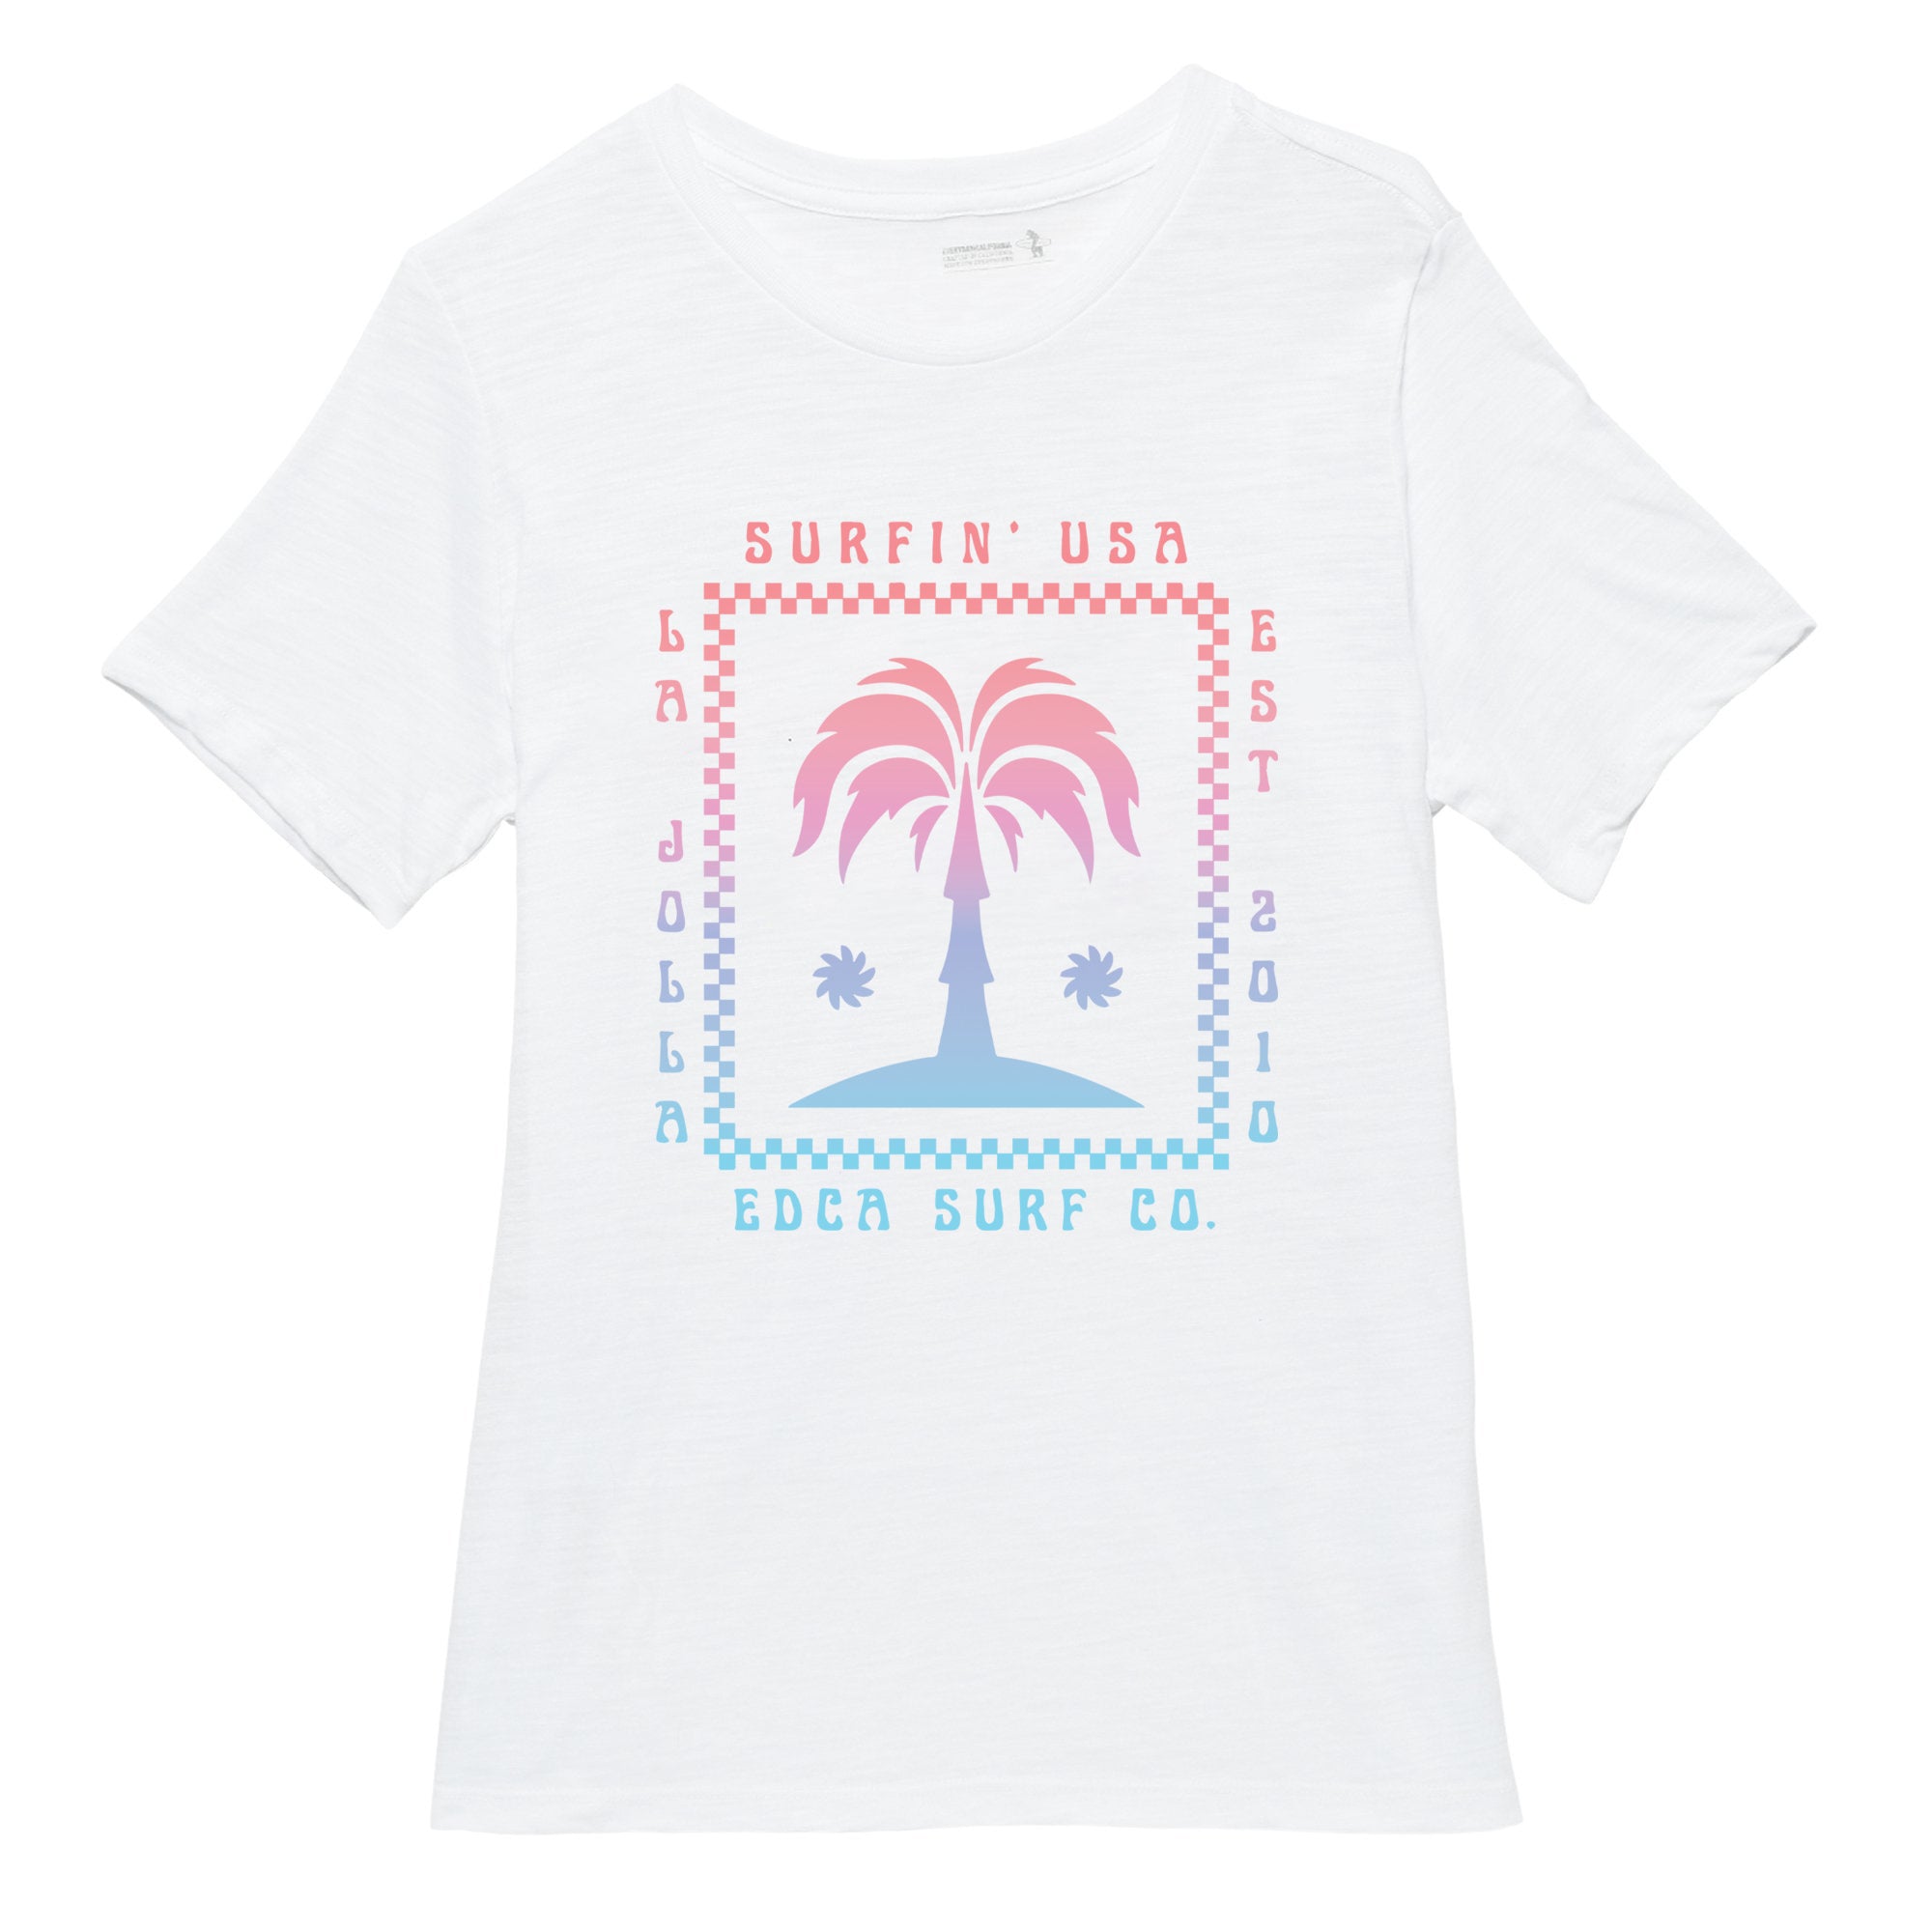 White T-shirt containing the words "Surfin' USA" "La Jolla" and "EDCA Surf Co." around a pastel colored palm tree